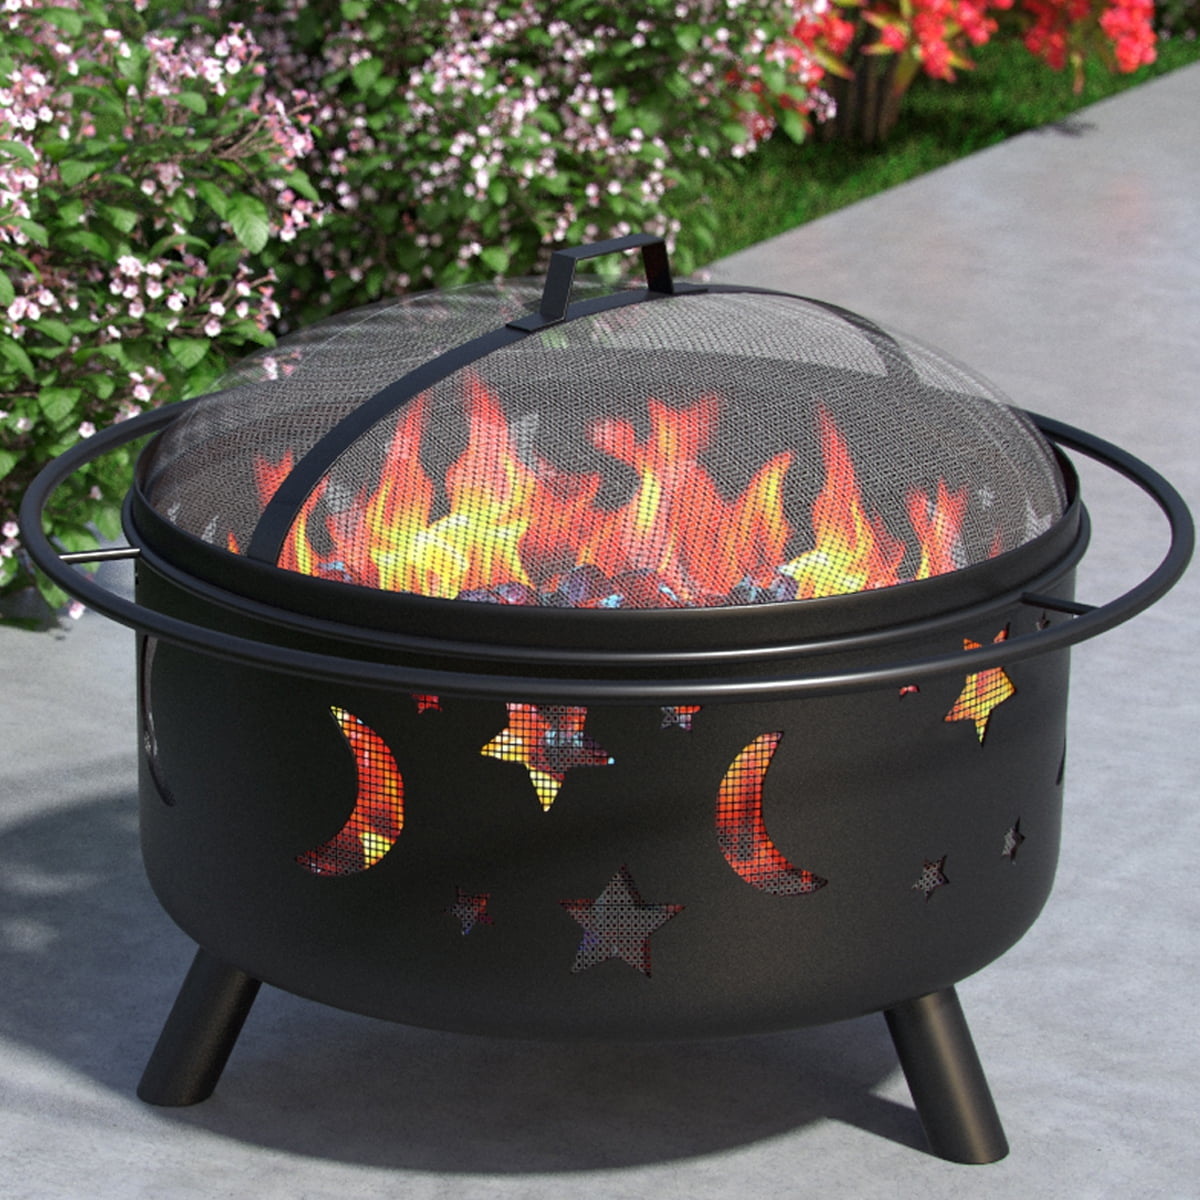 Regal Flame Solar 23 Portable Outdoor Fireplace Fire Pit Ring for Backyard Patio Fire, RV, Patio Heater, Stove, Camping, Bonfir